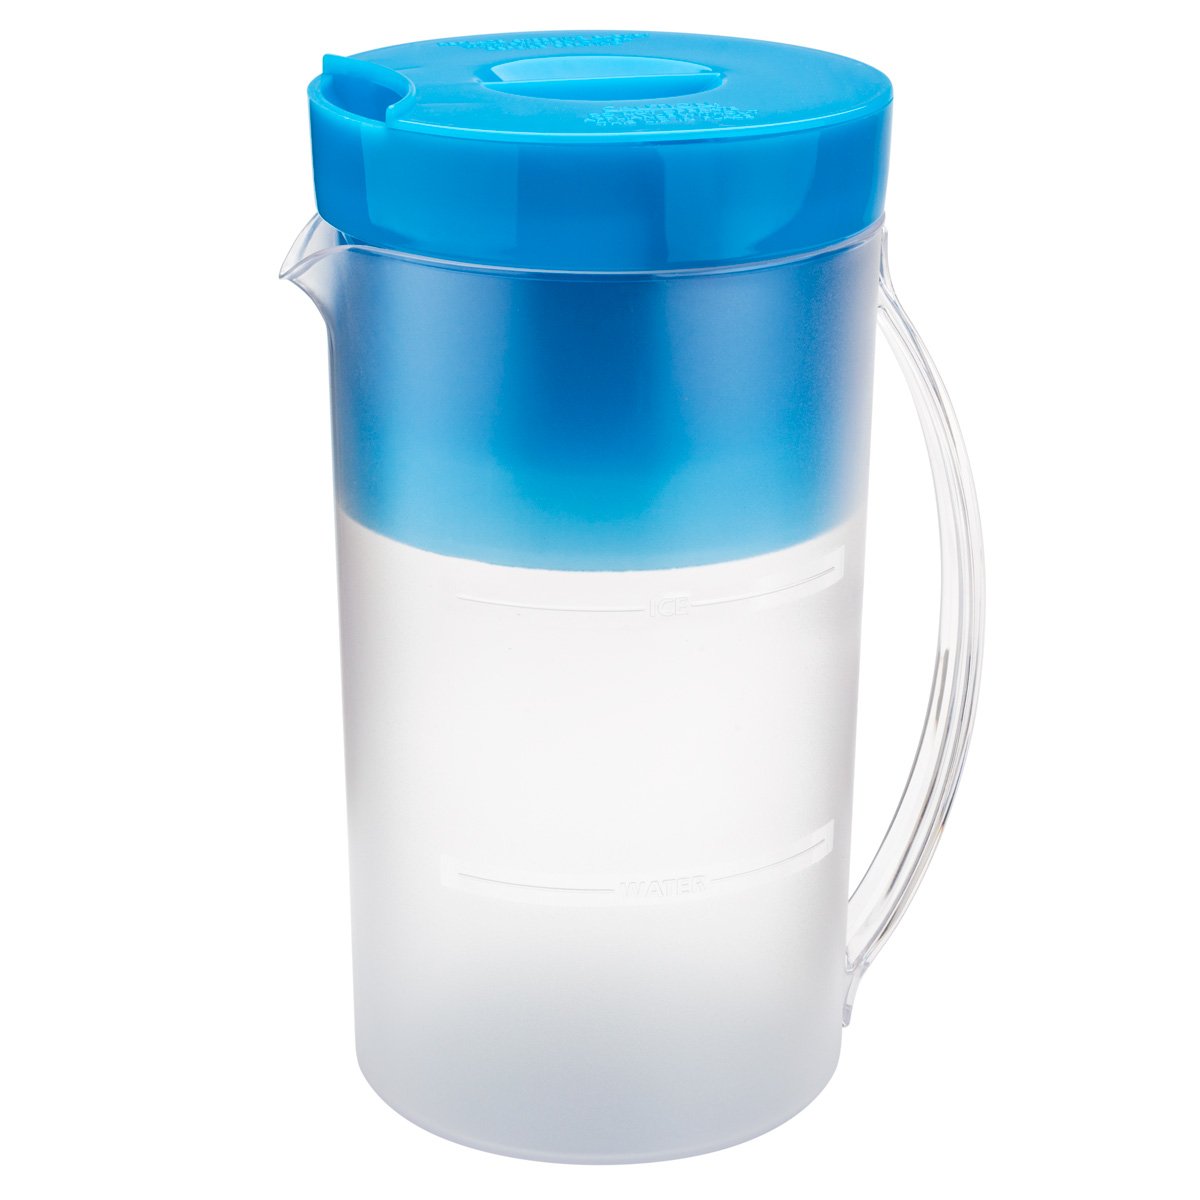 Oster Iced Tea Maker Pitcher BVST-TP23,  price tracker / tracking,   price history charts,  price watches,  price drop alerts